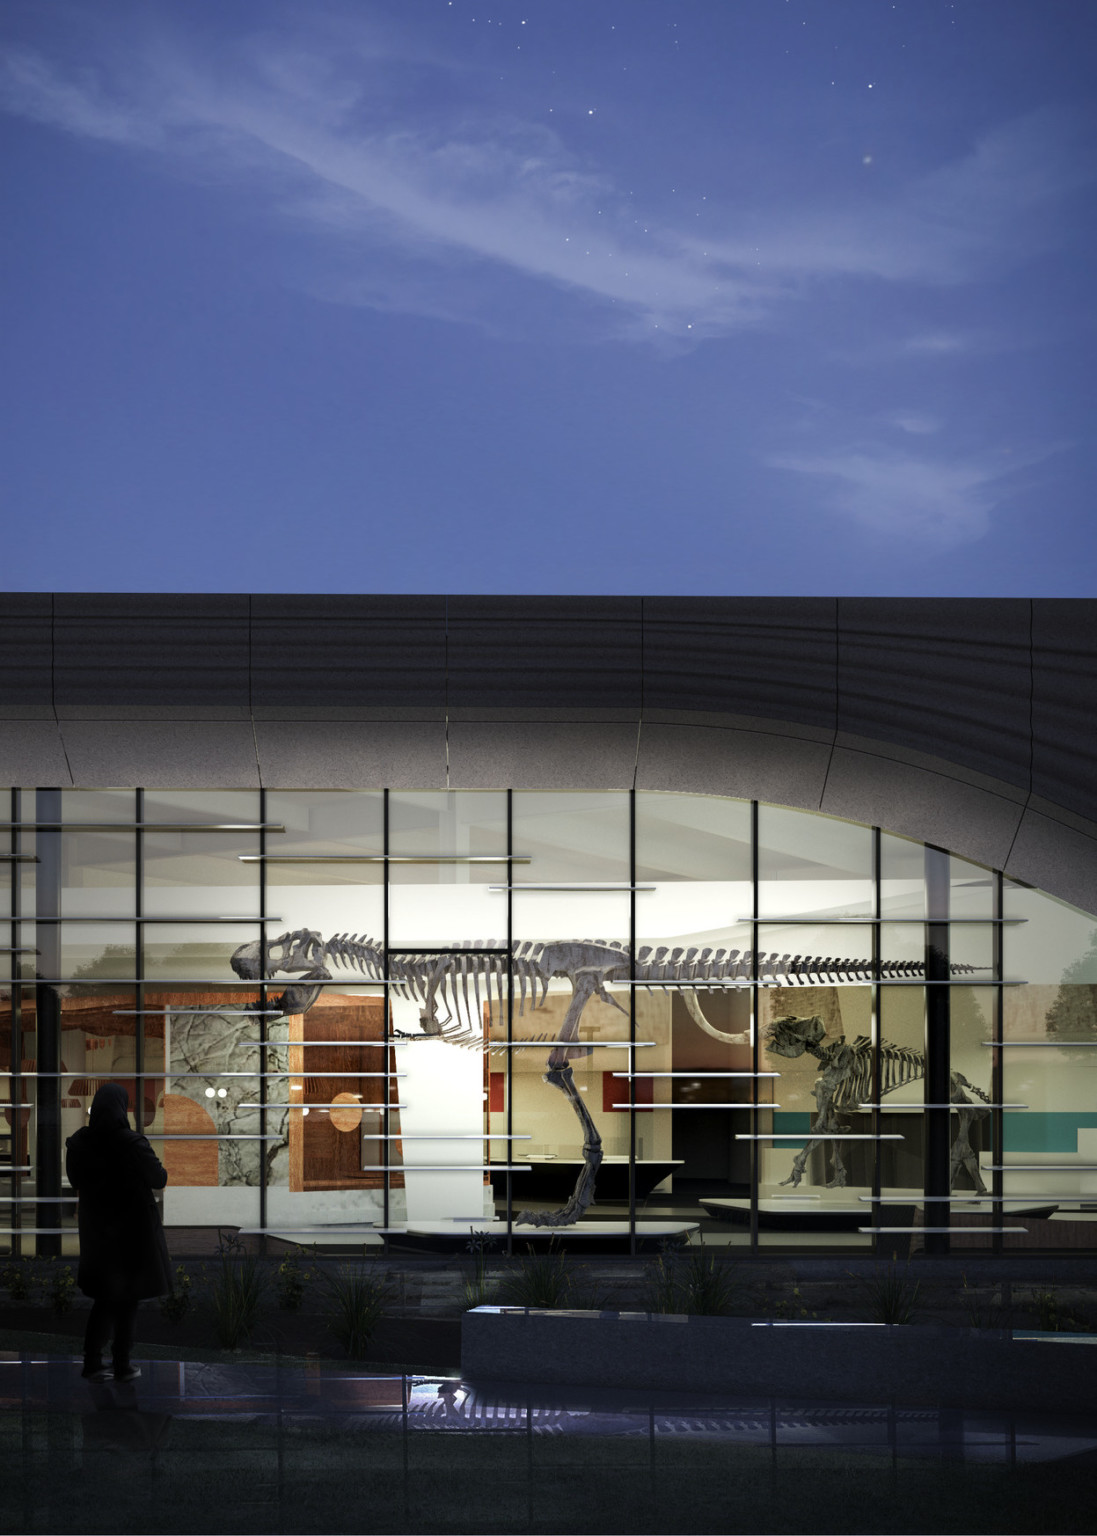 Rendering of gallery exterior at night, illuminated with exhibits visible, including a large dinosaur skeleton